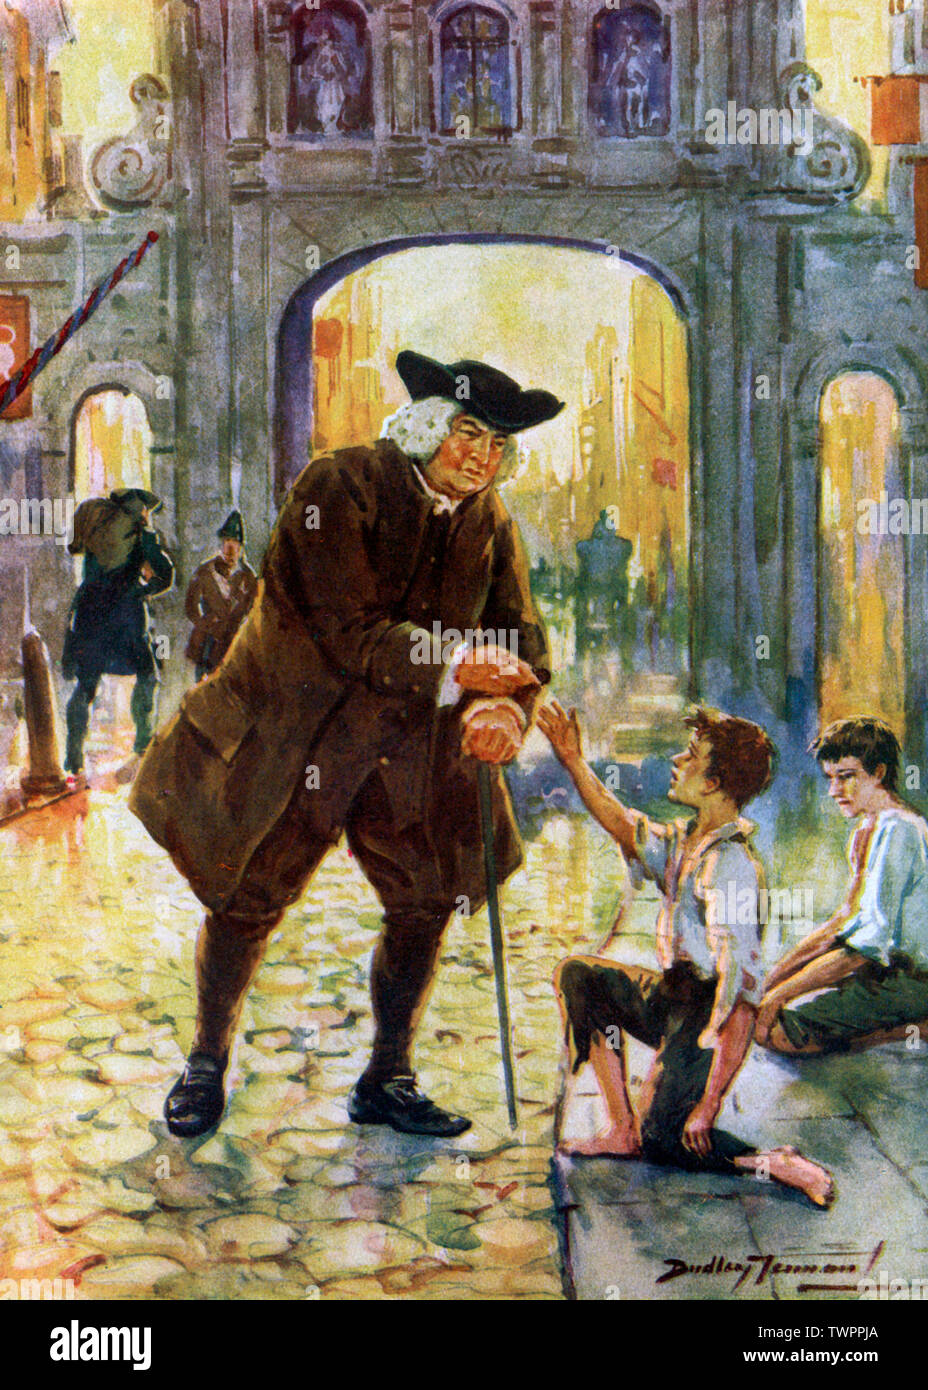 Dr Johnson giving money to impoverished children by Temple Bar Gate, London. By Dudley Tennant (1867-1952). Samuel Johnson (1709-1784), often referred to as Dr Johnson, was an English writer who made lasting contributions to English literature as a poet, playwright, essayist, moralist, literary critic, biographer, editor and lexicographer. Stock Photo